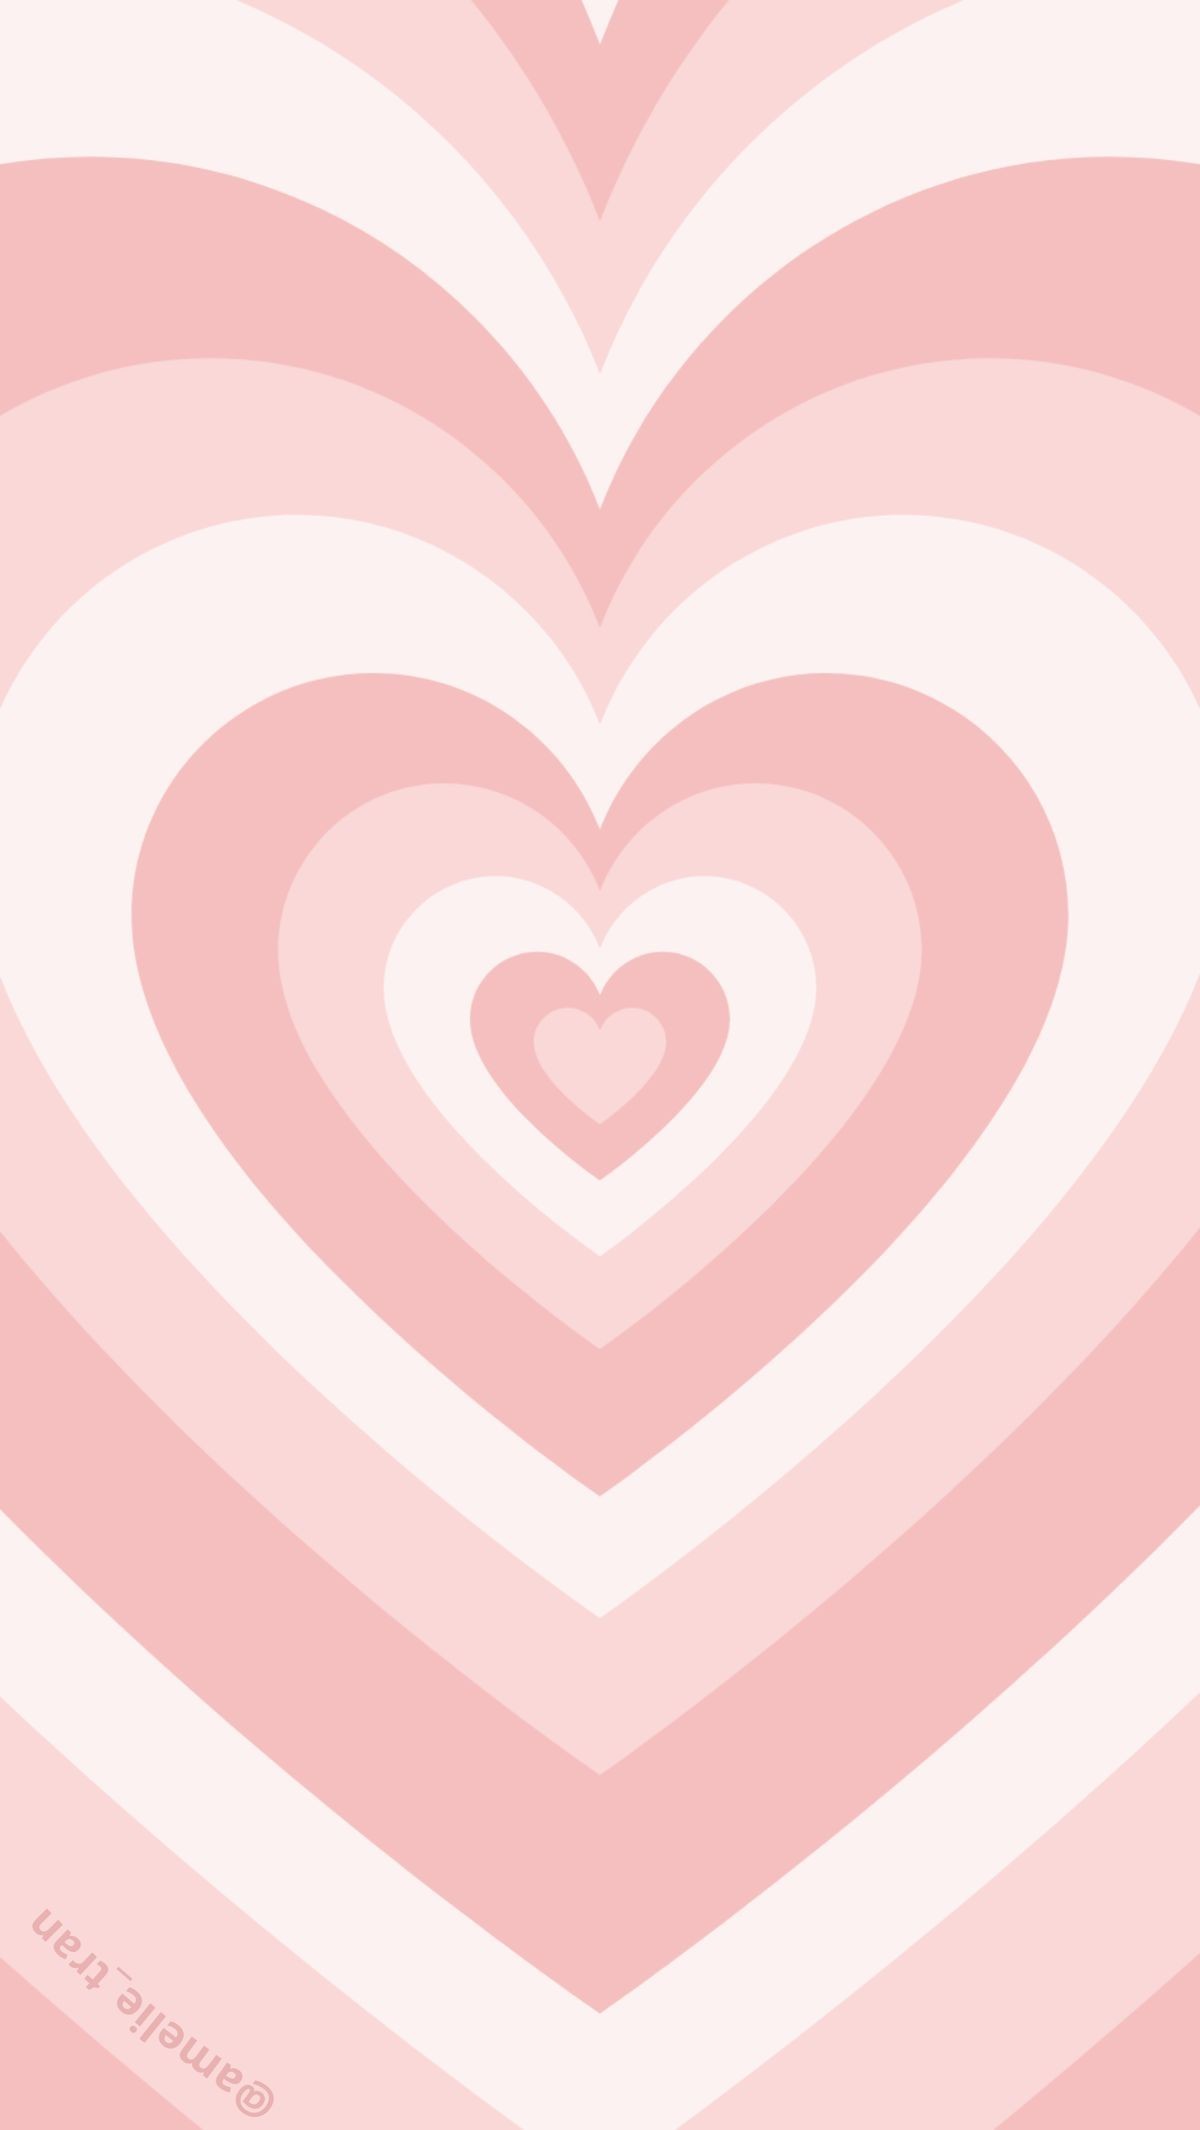 IPhone wallpaper with a pink heart design - Pink heart